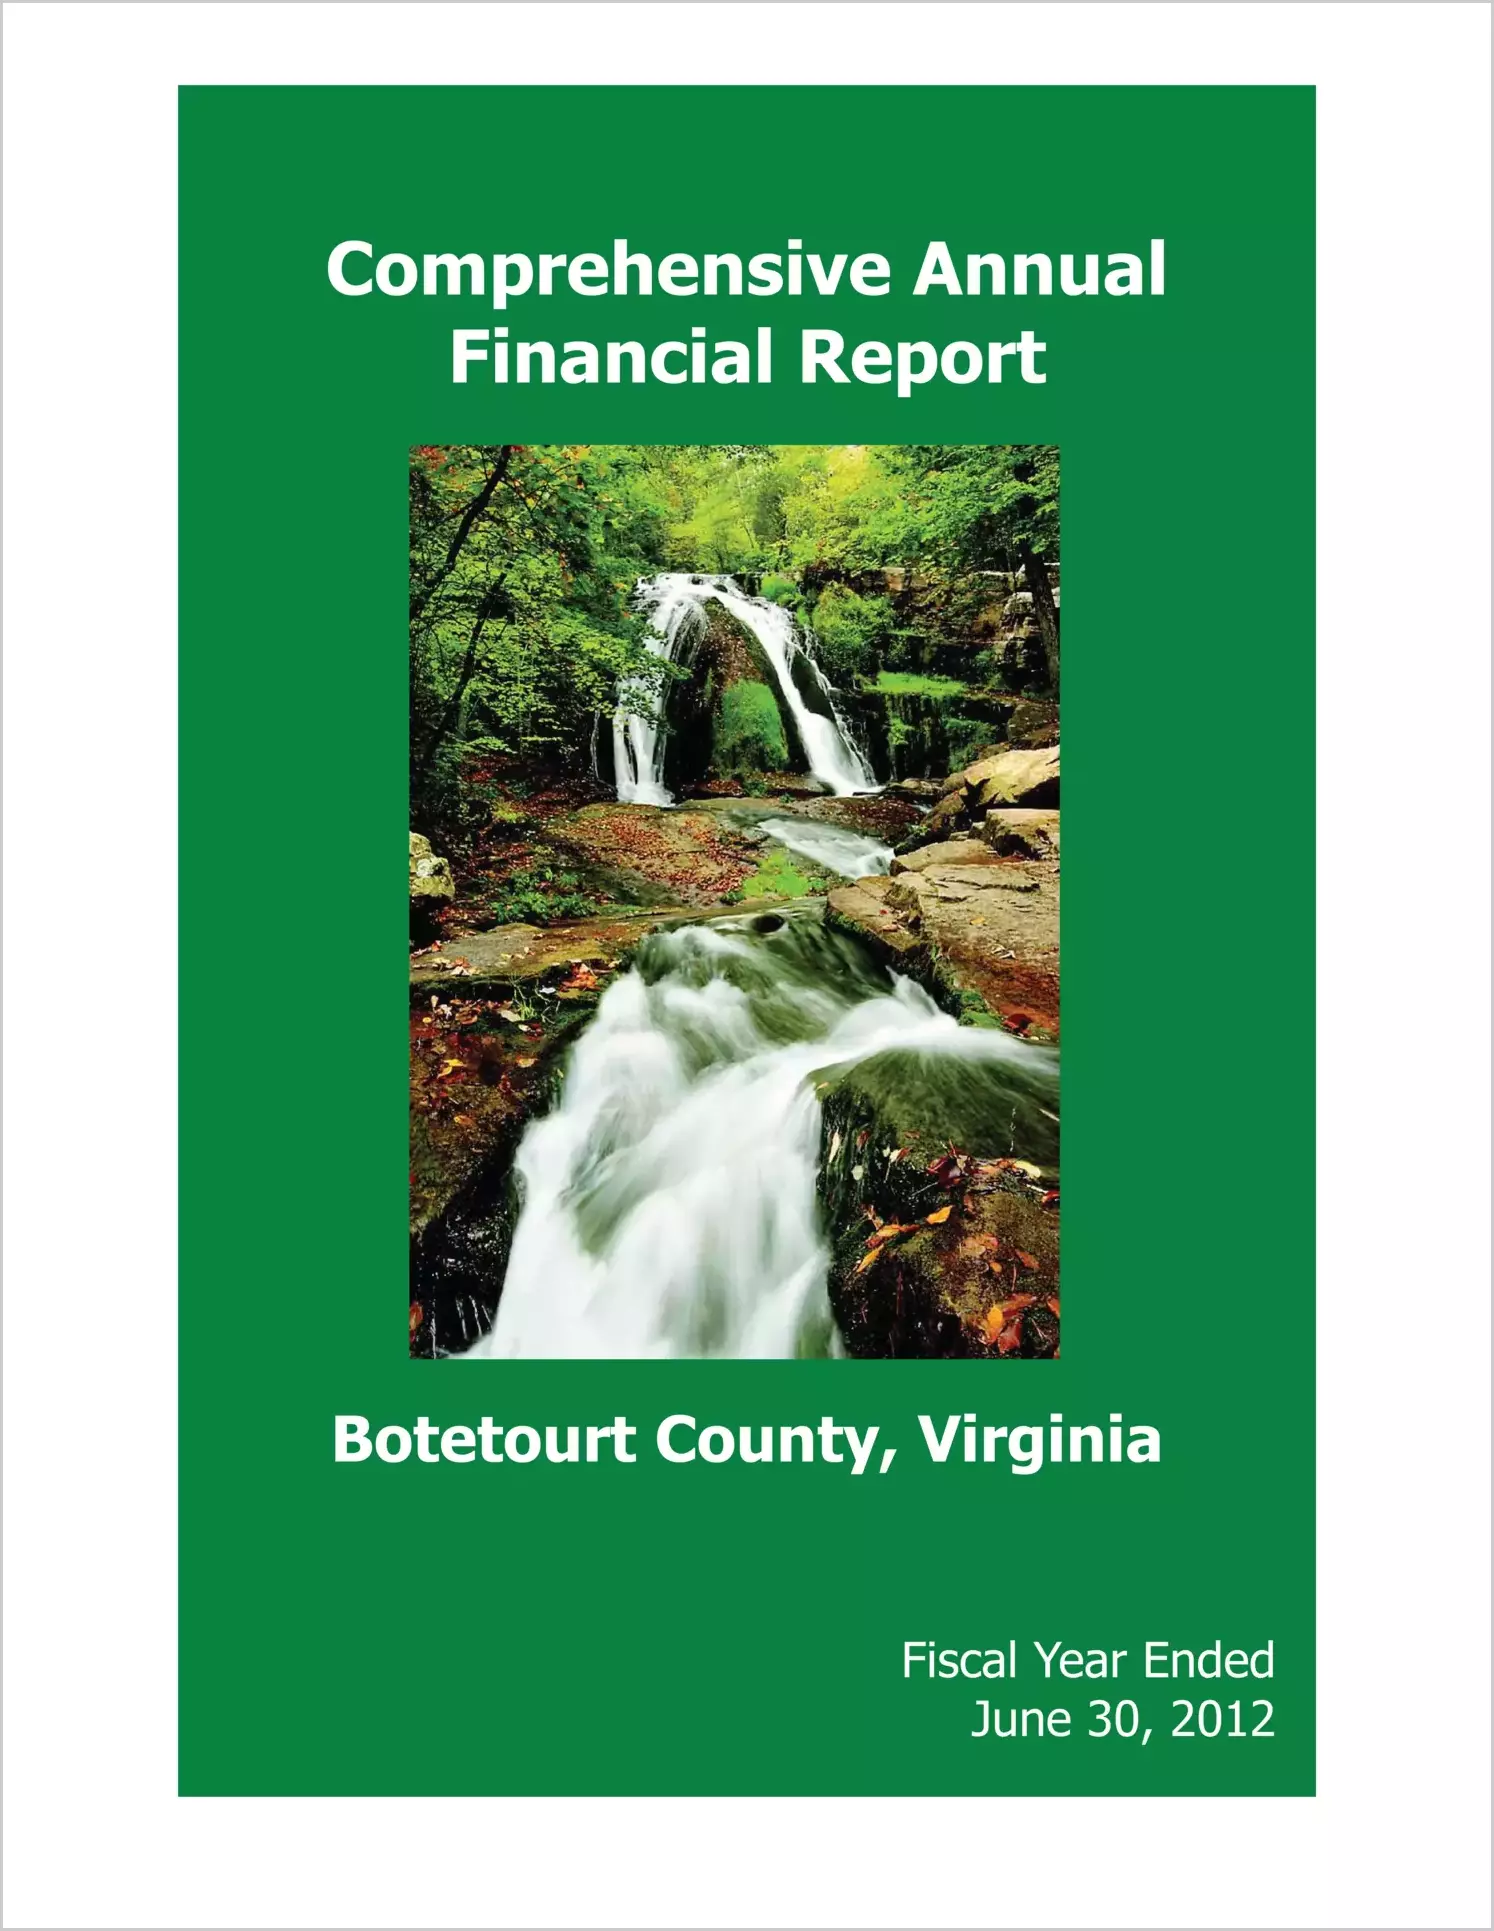 2012 Annual Financial Report for County of Botetourt